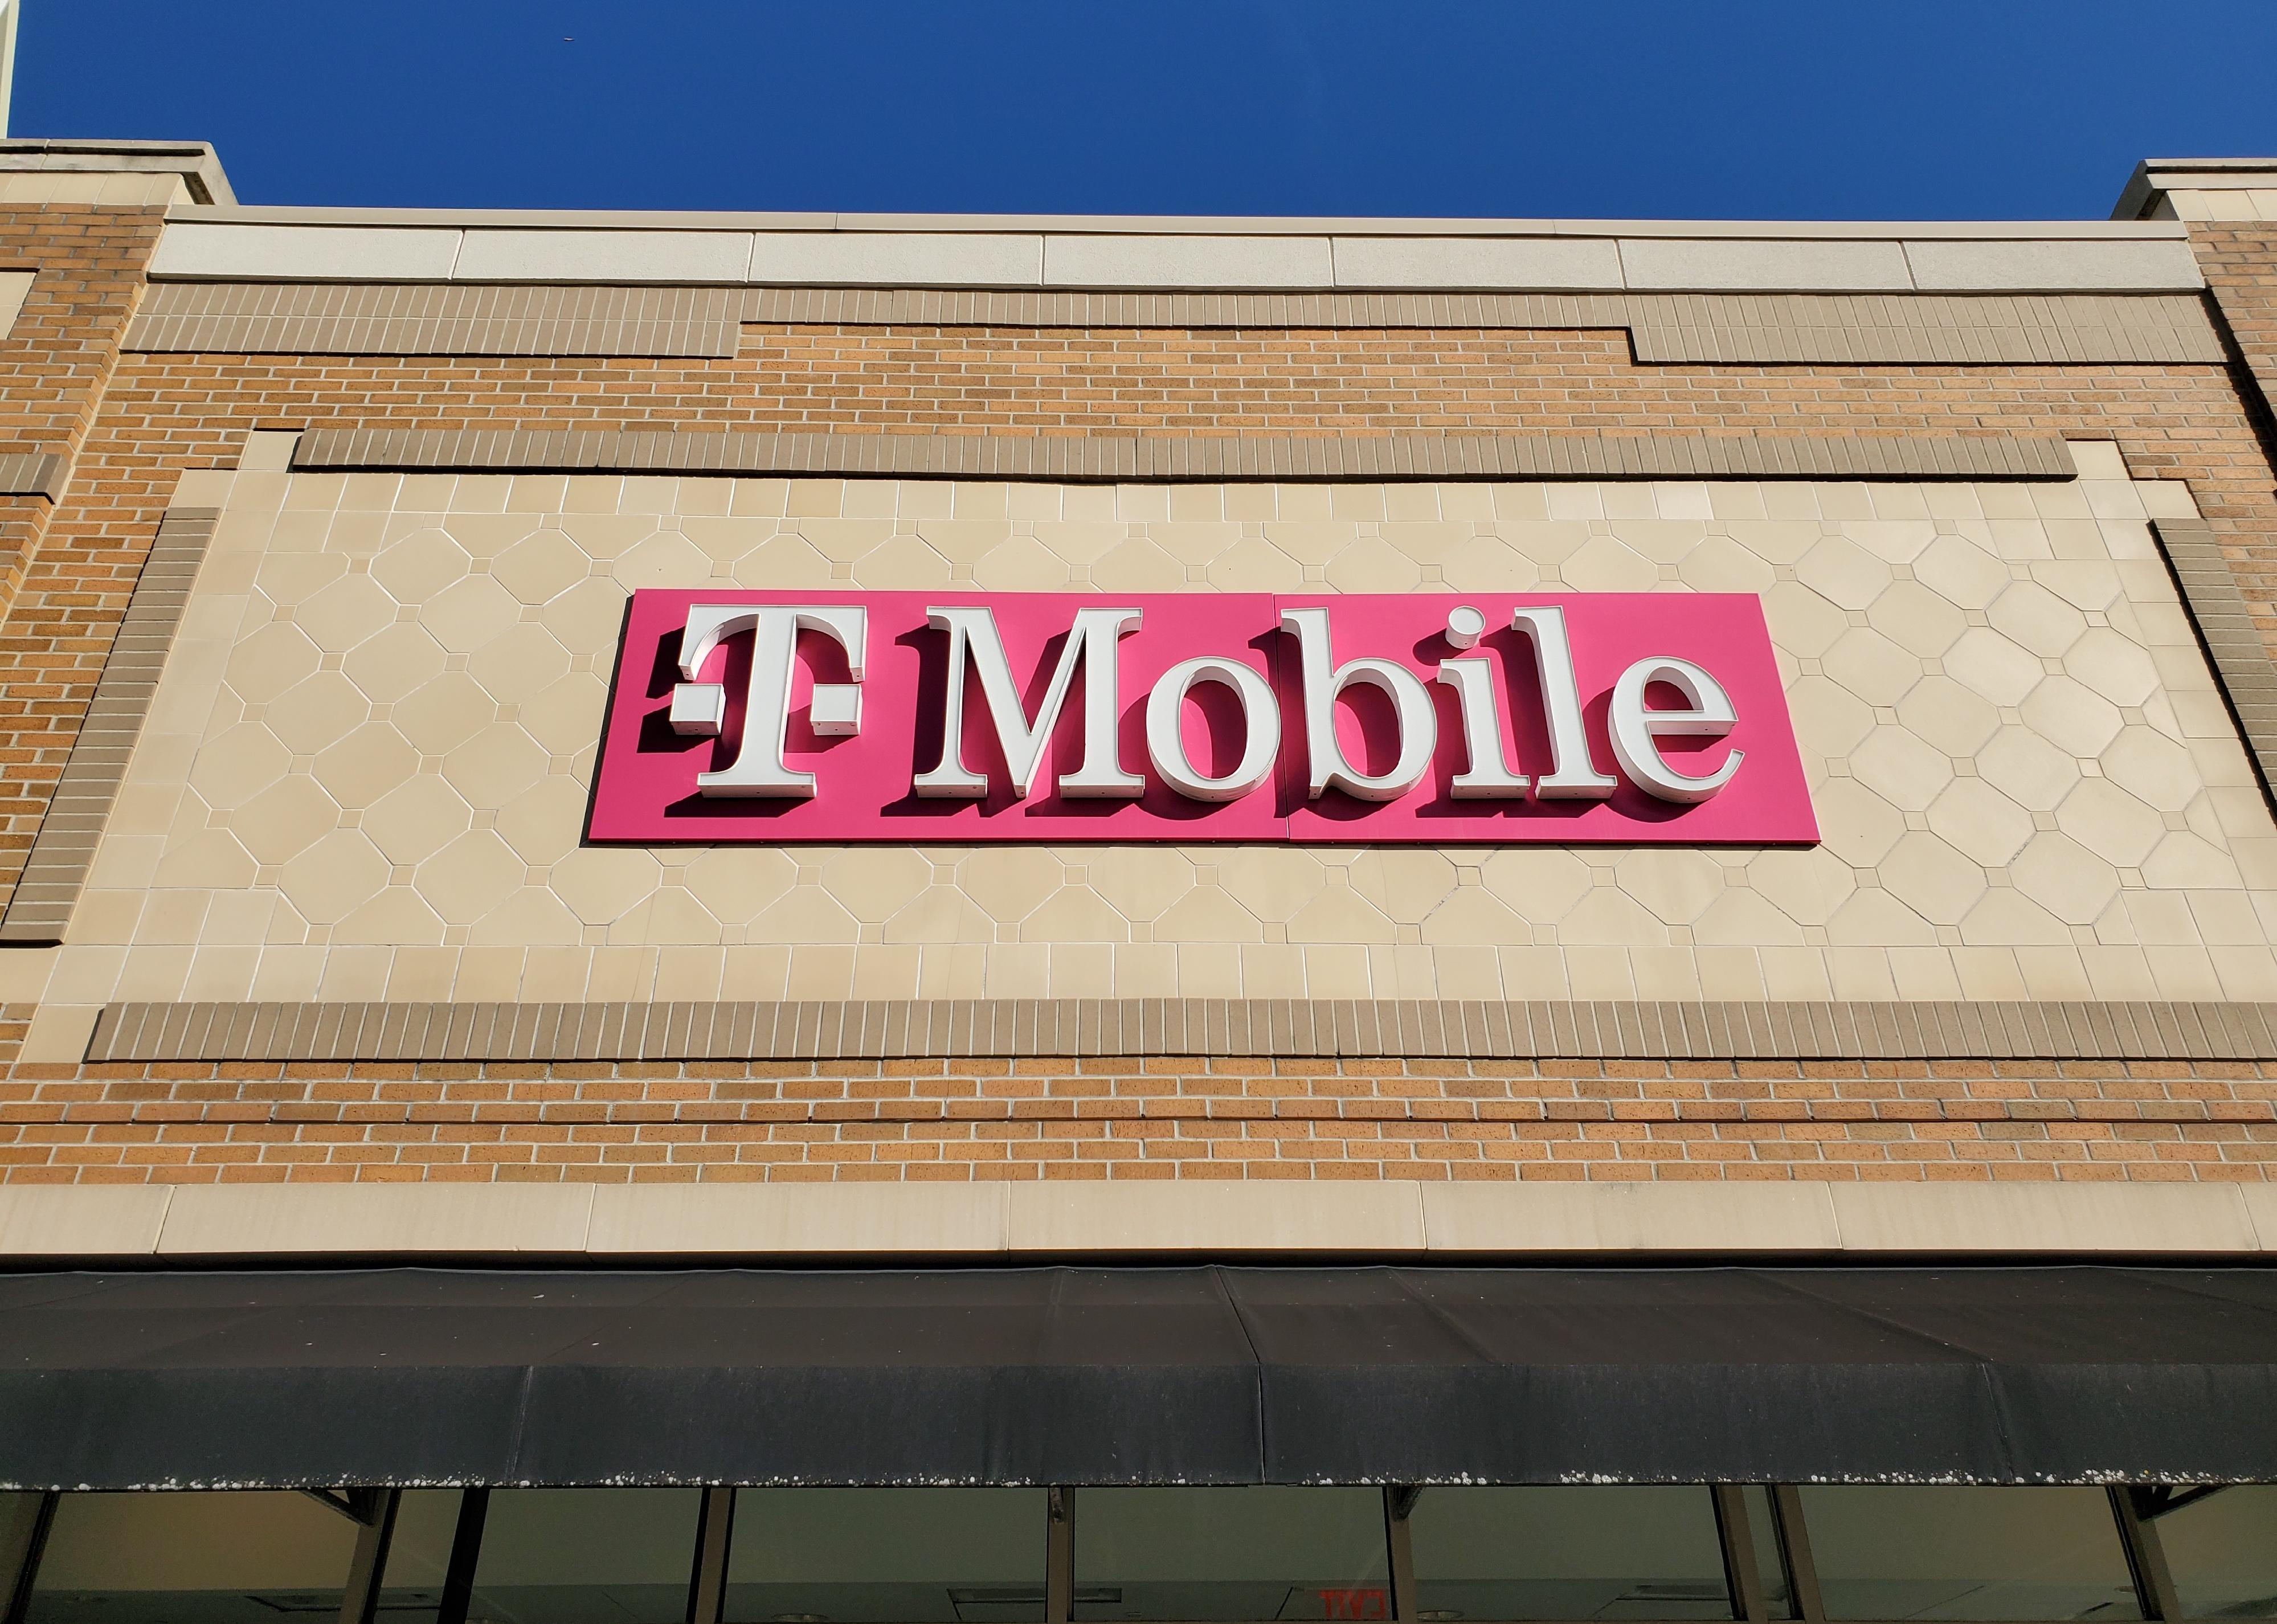 Sign for T-Mobile on outside of building.